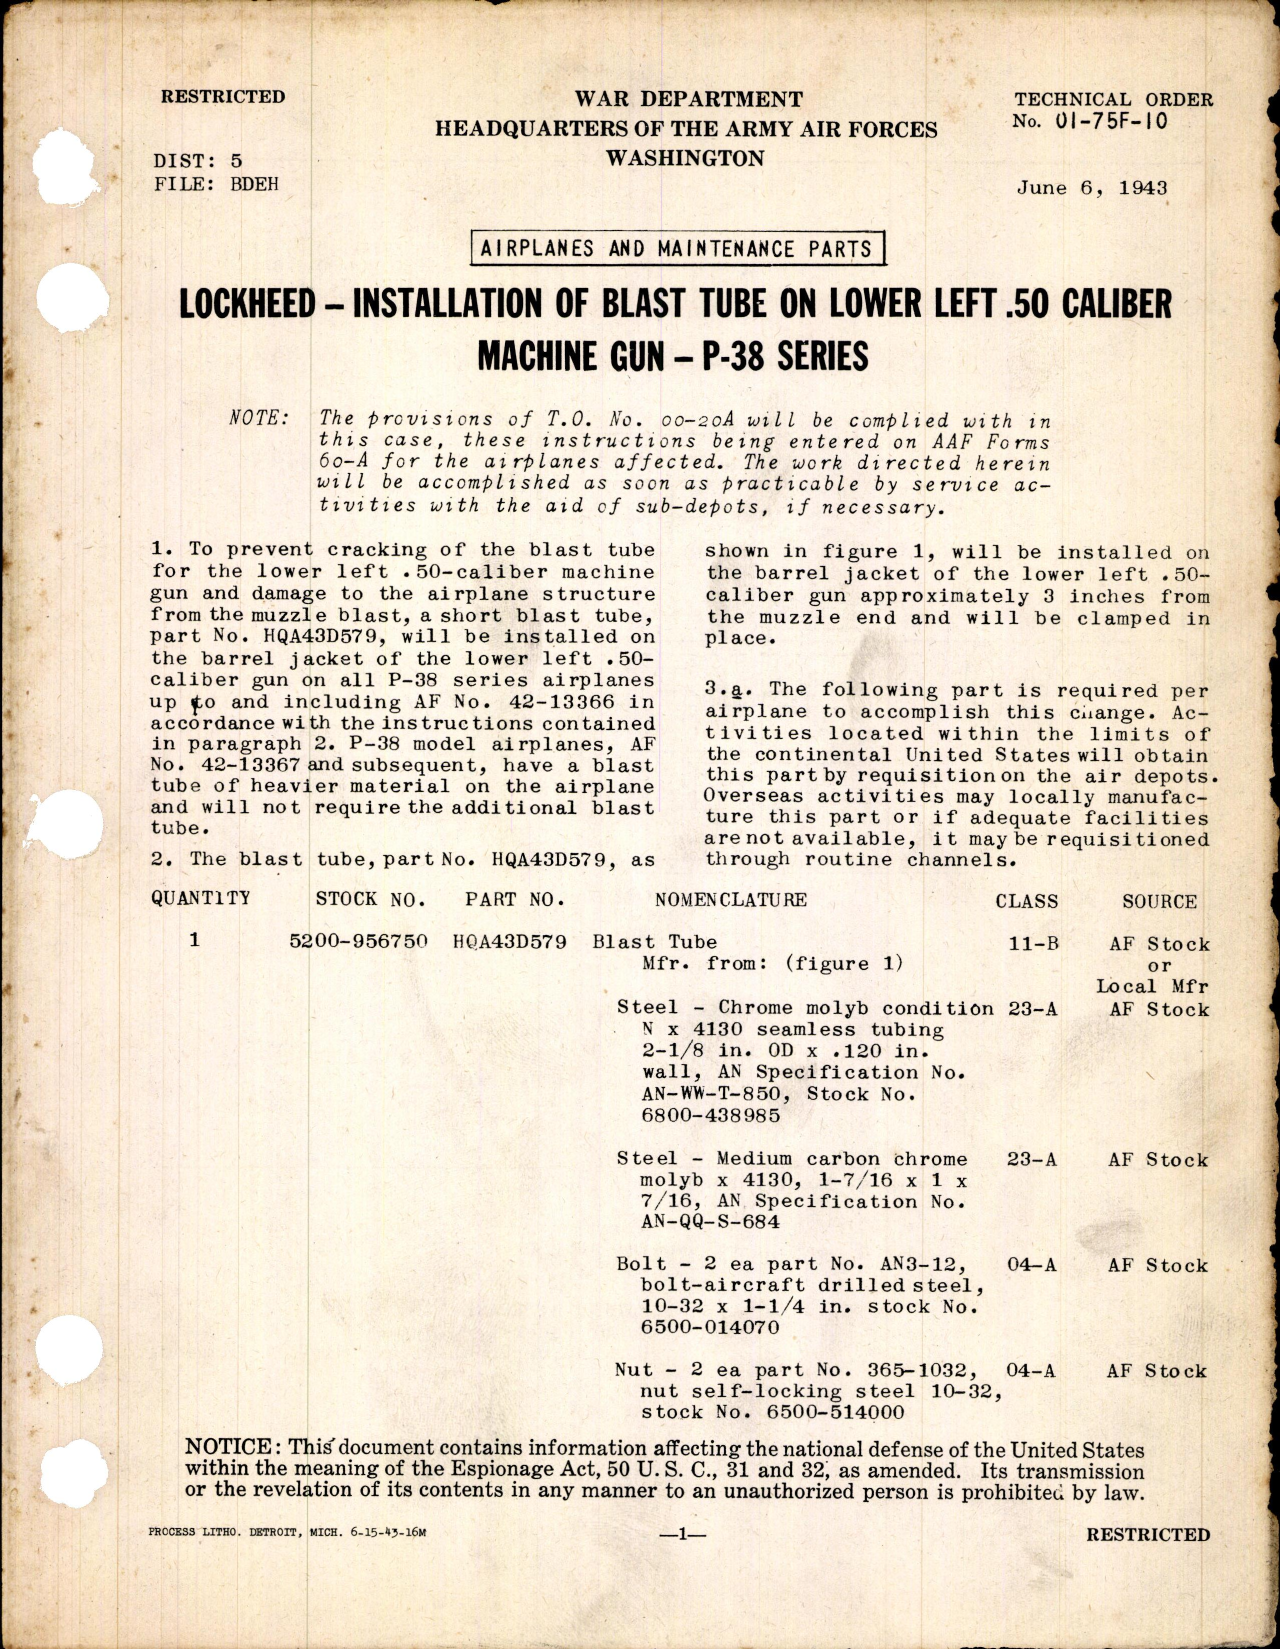 Sample page 1 from AirCorps Library document: Installation of Blast Tube on Lower Left .50 Caliber Machine Gun for P-38 Series